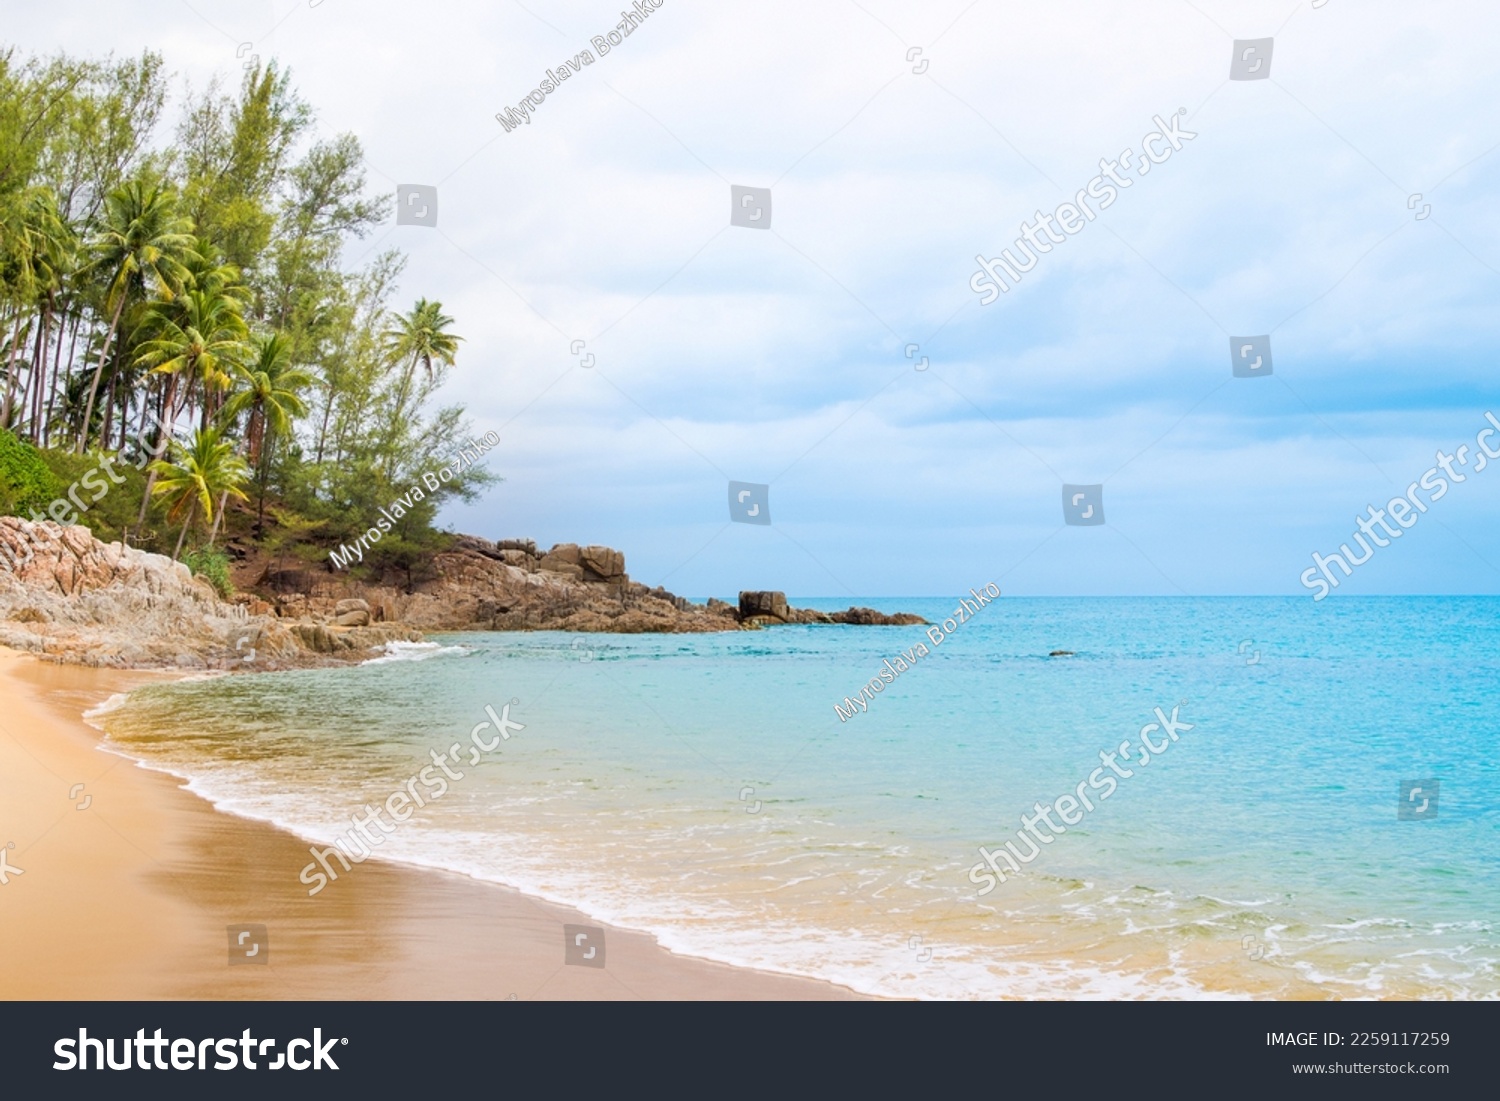 Beautiful landscape of the Indian Ocean coast with a rocky beach on the island of Phuket, Thailand #2259117259